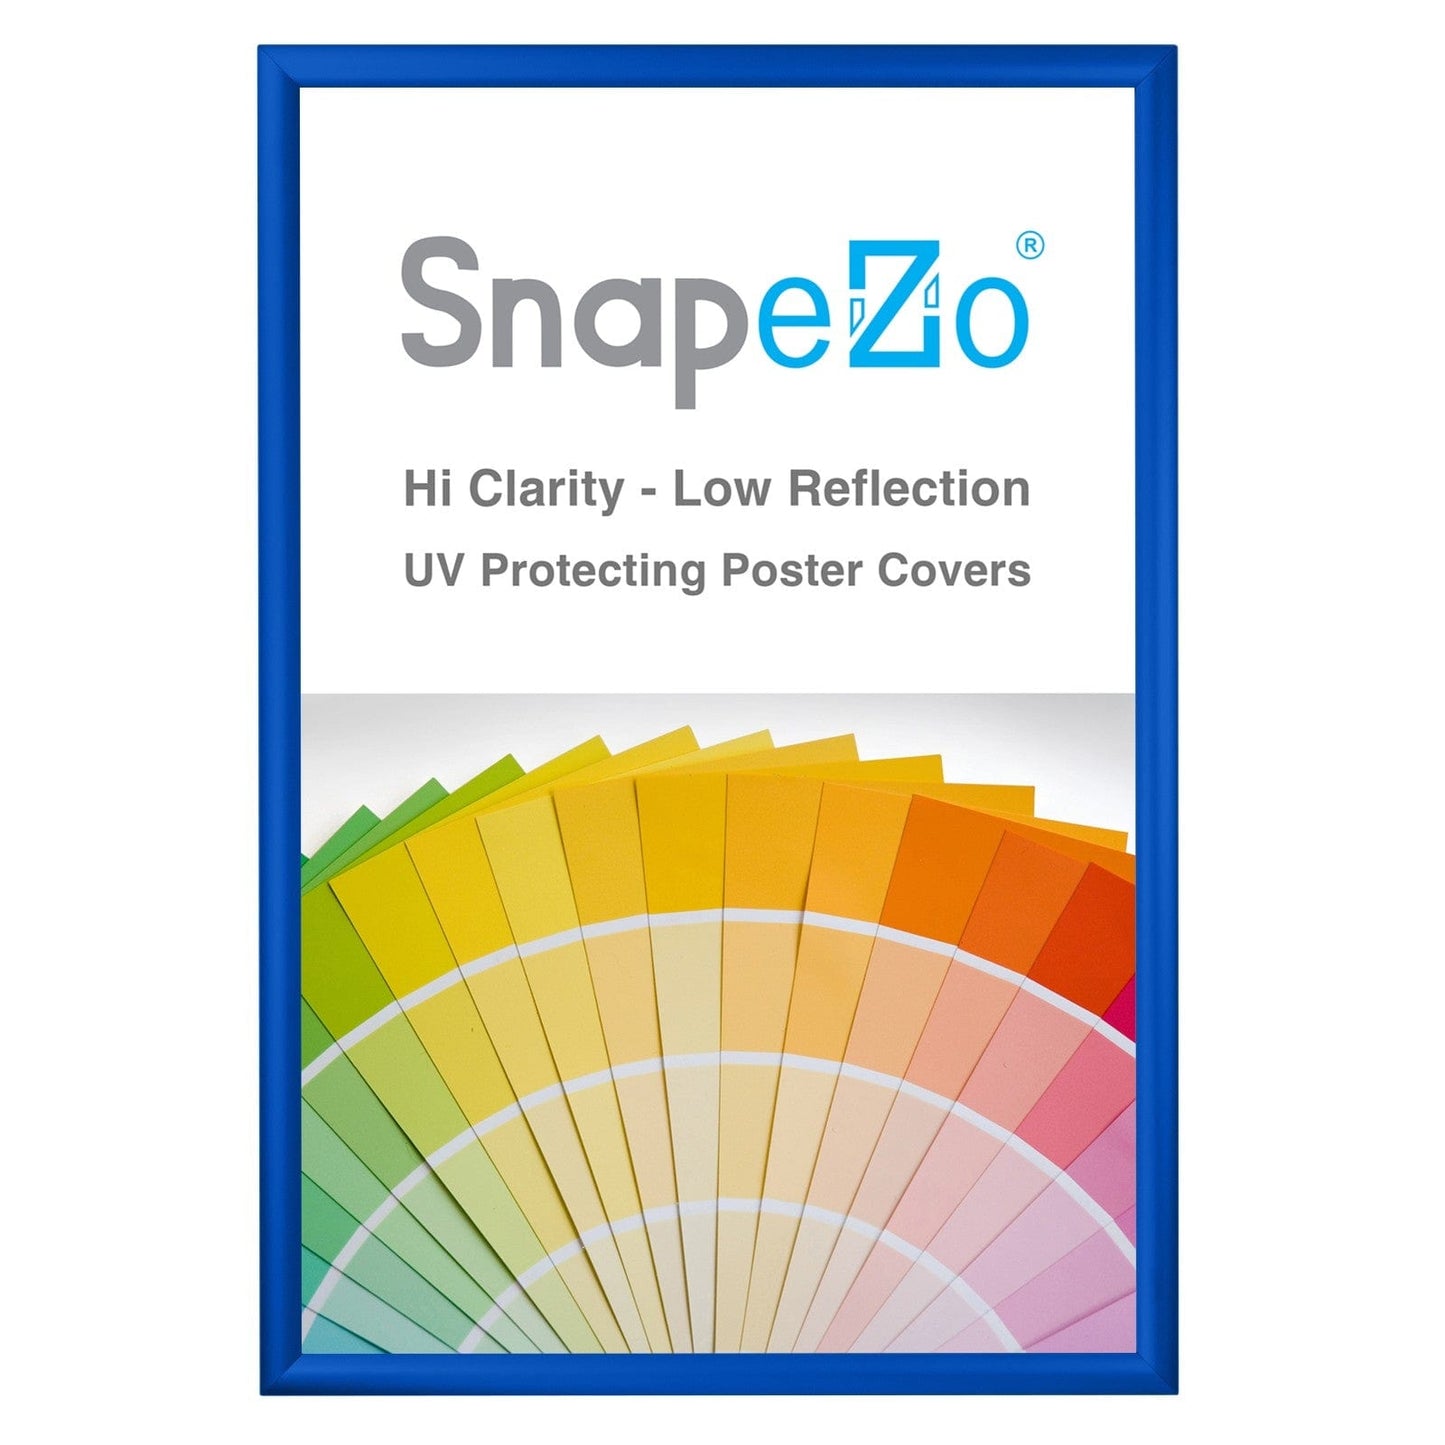 28x42 Blue SnapeZo® Snap Frame - 1.2" Profile - Snap Frames Direct